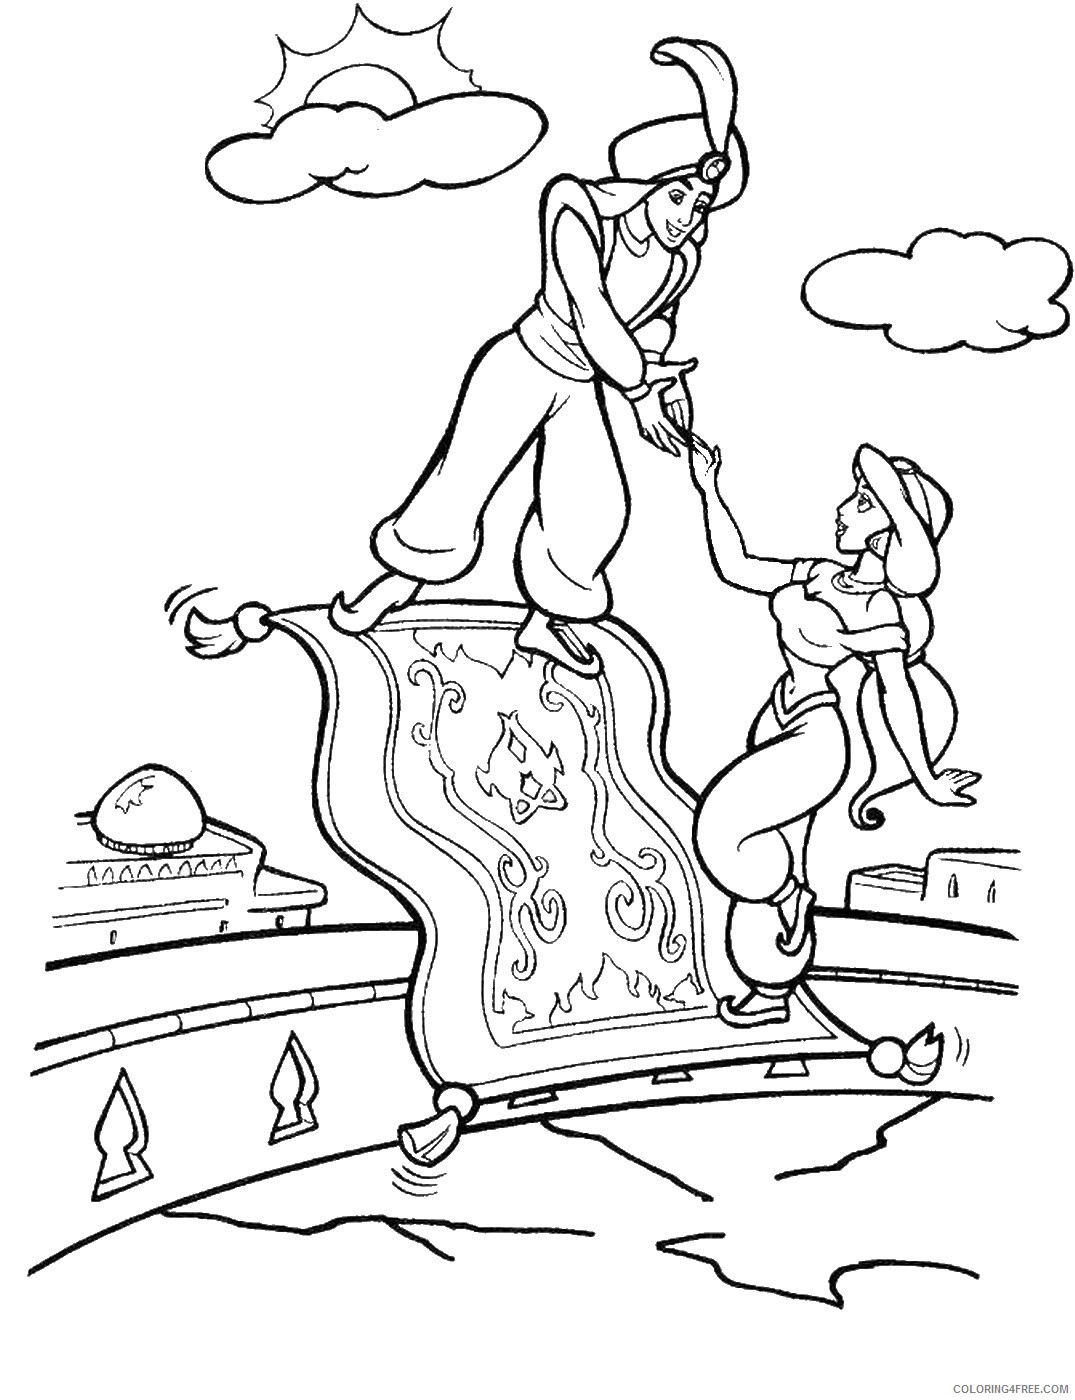 Aladdin Coloring Pages Cartoons aladdin_63 Printable 2020 0309 Coloring4free